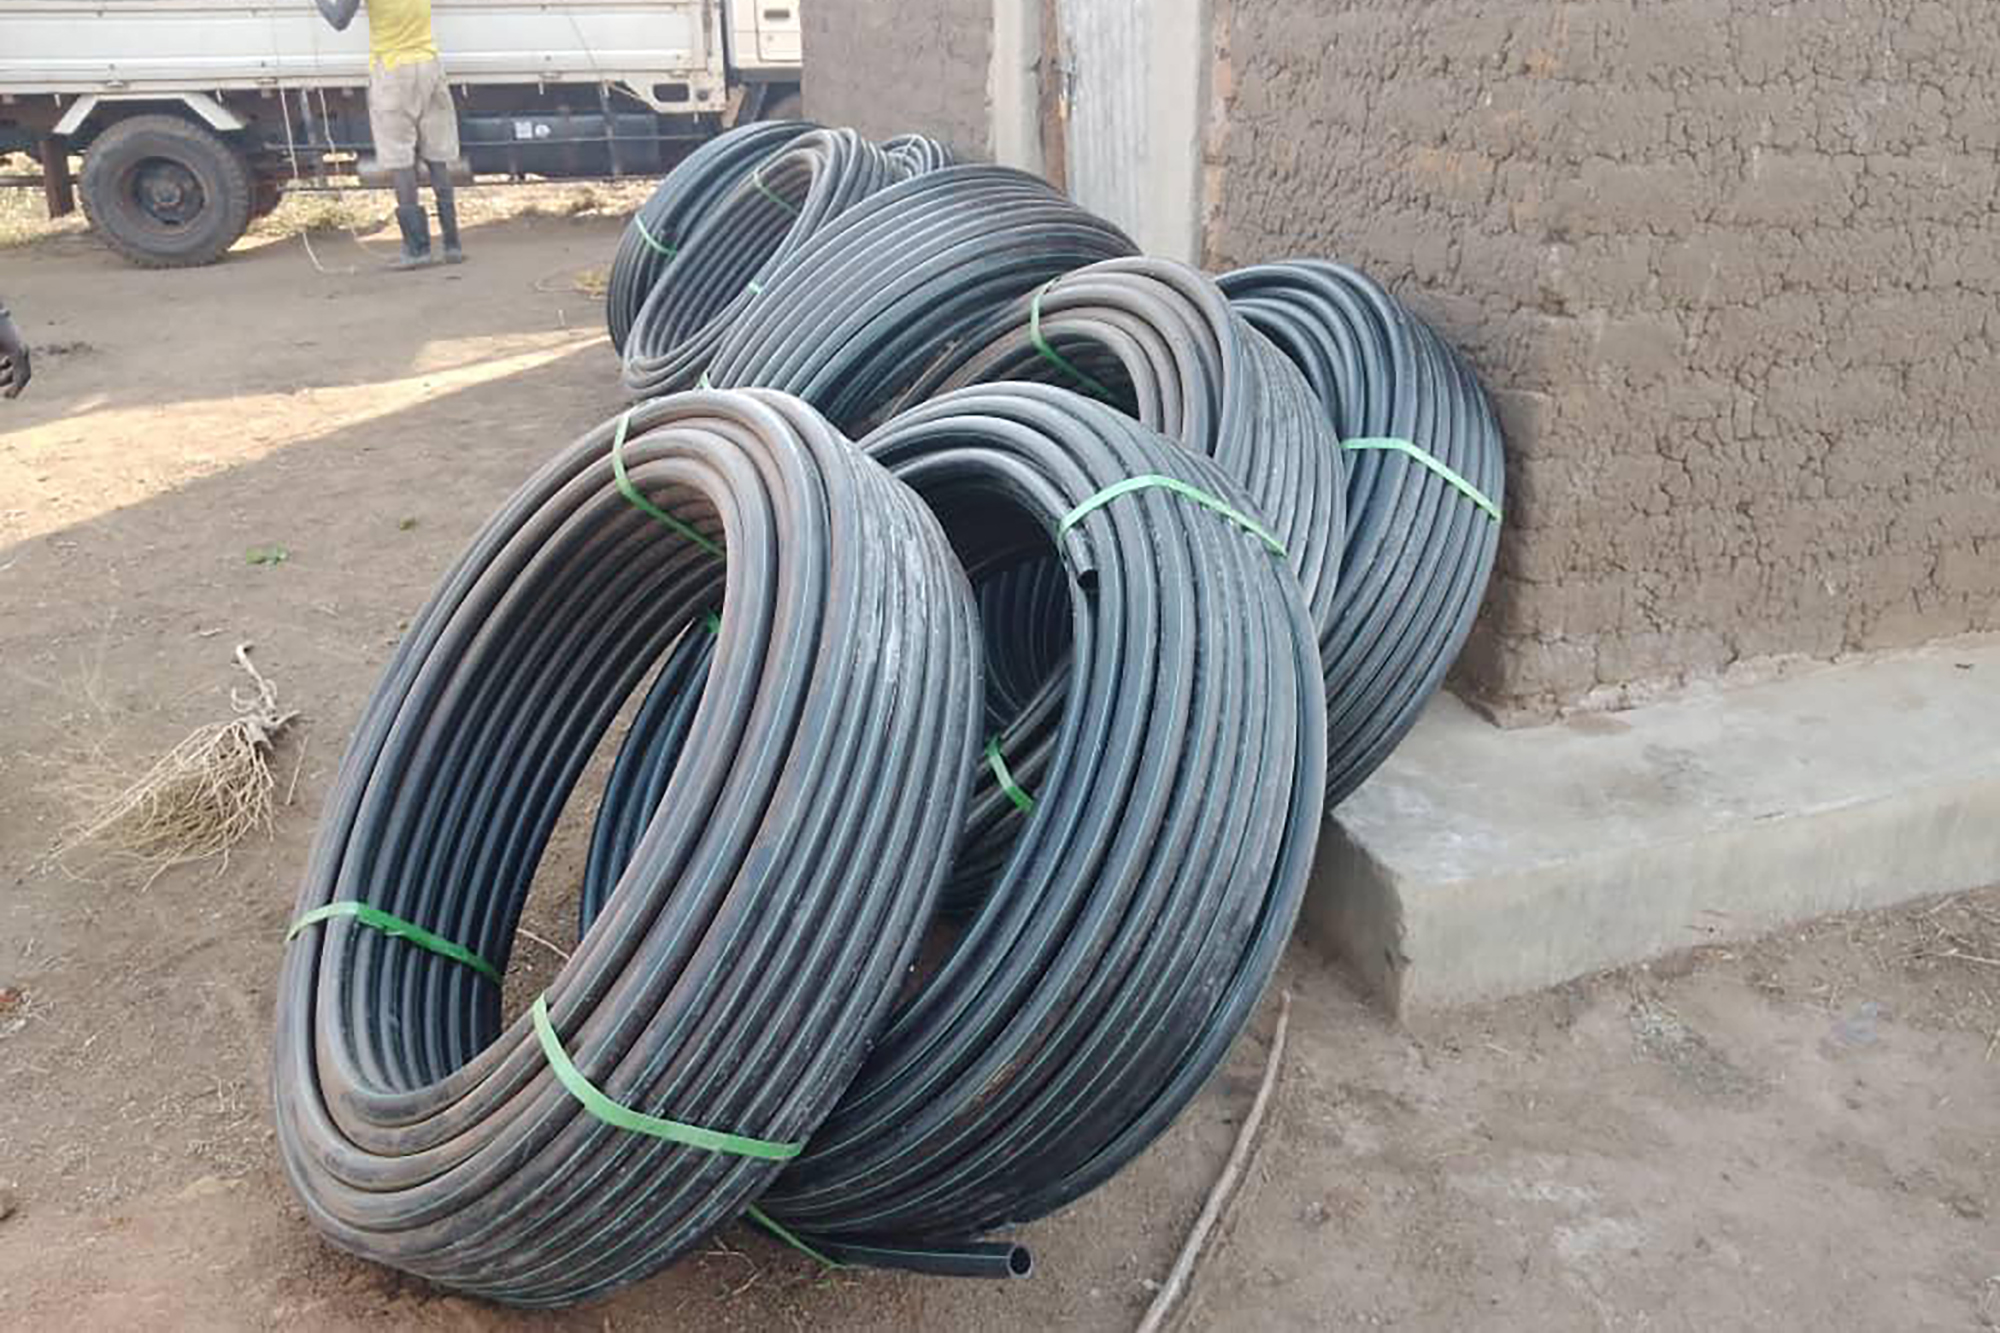 Coiled building material leaning against a wall in Uganda.